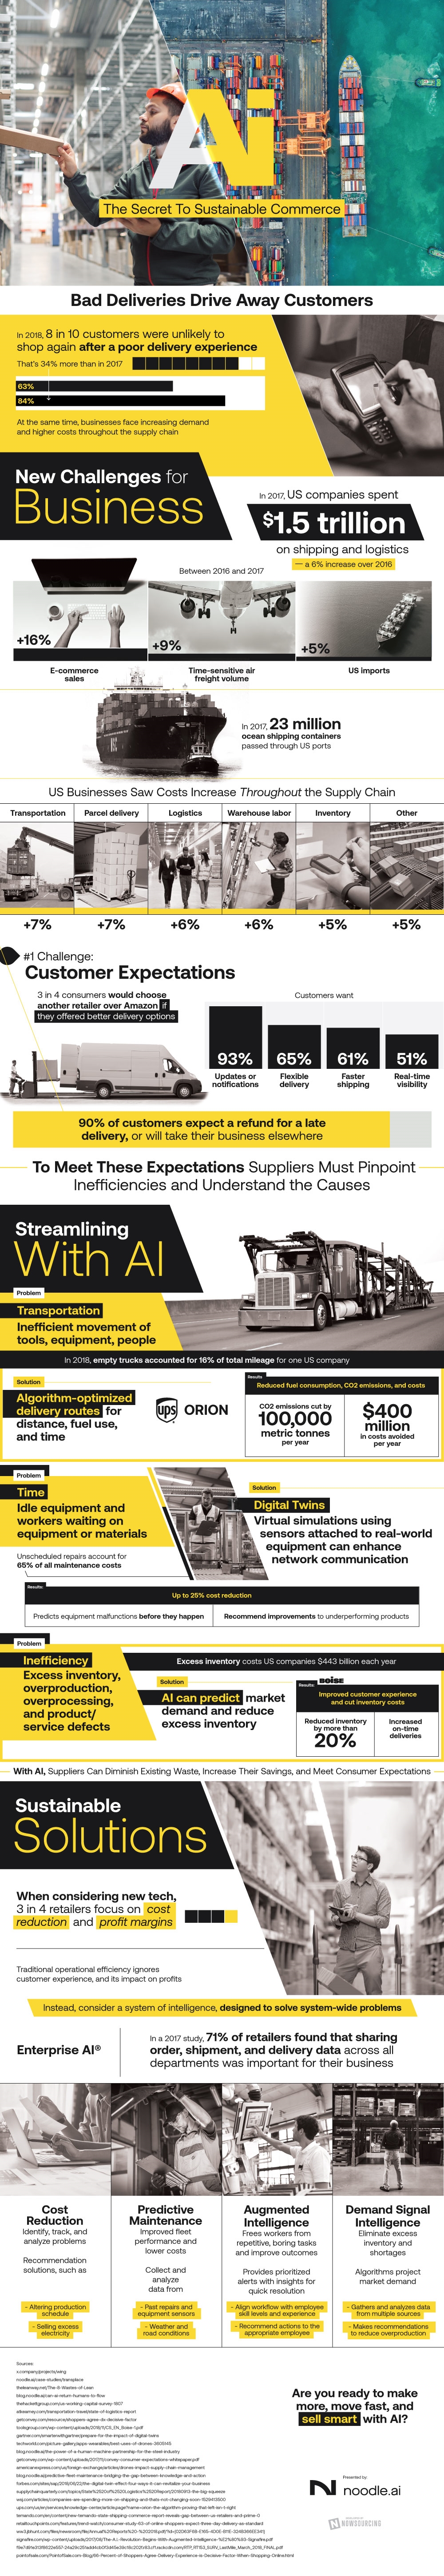 Can AI Fix Inefficiencies in the Supply Chain? [Infographic]